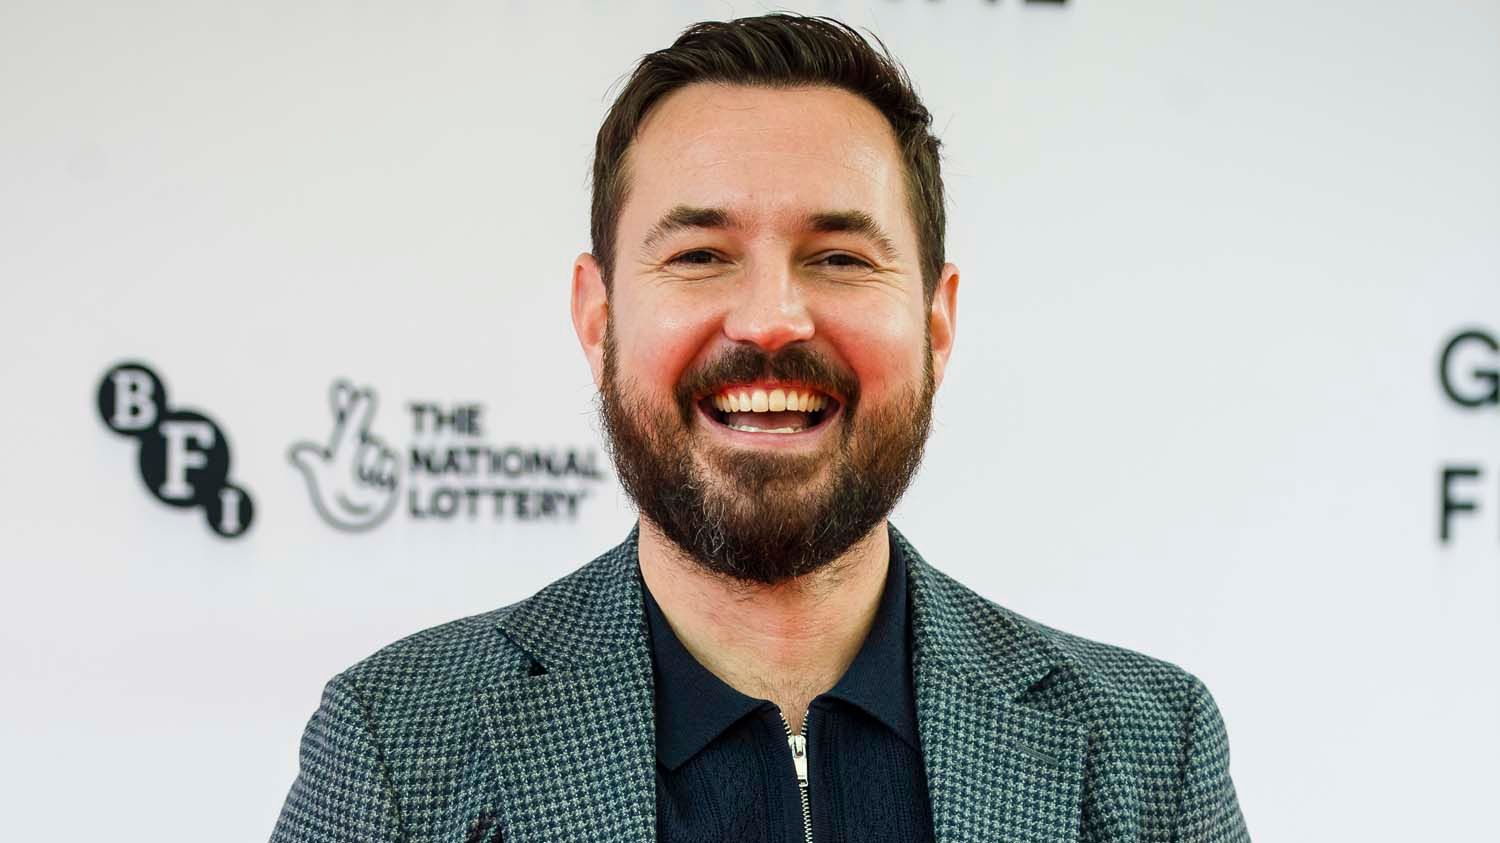 19-extraordinary-facts-about-martin-compston